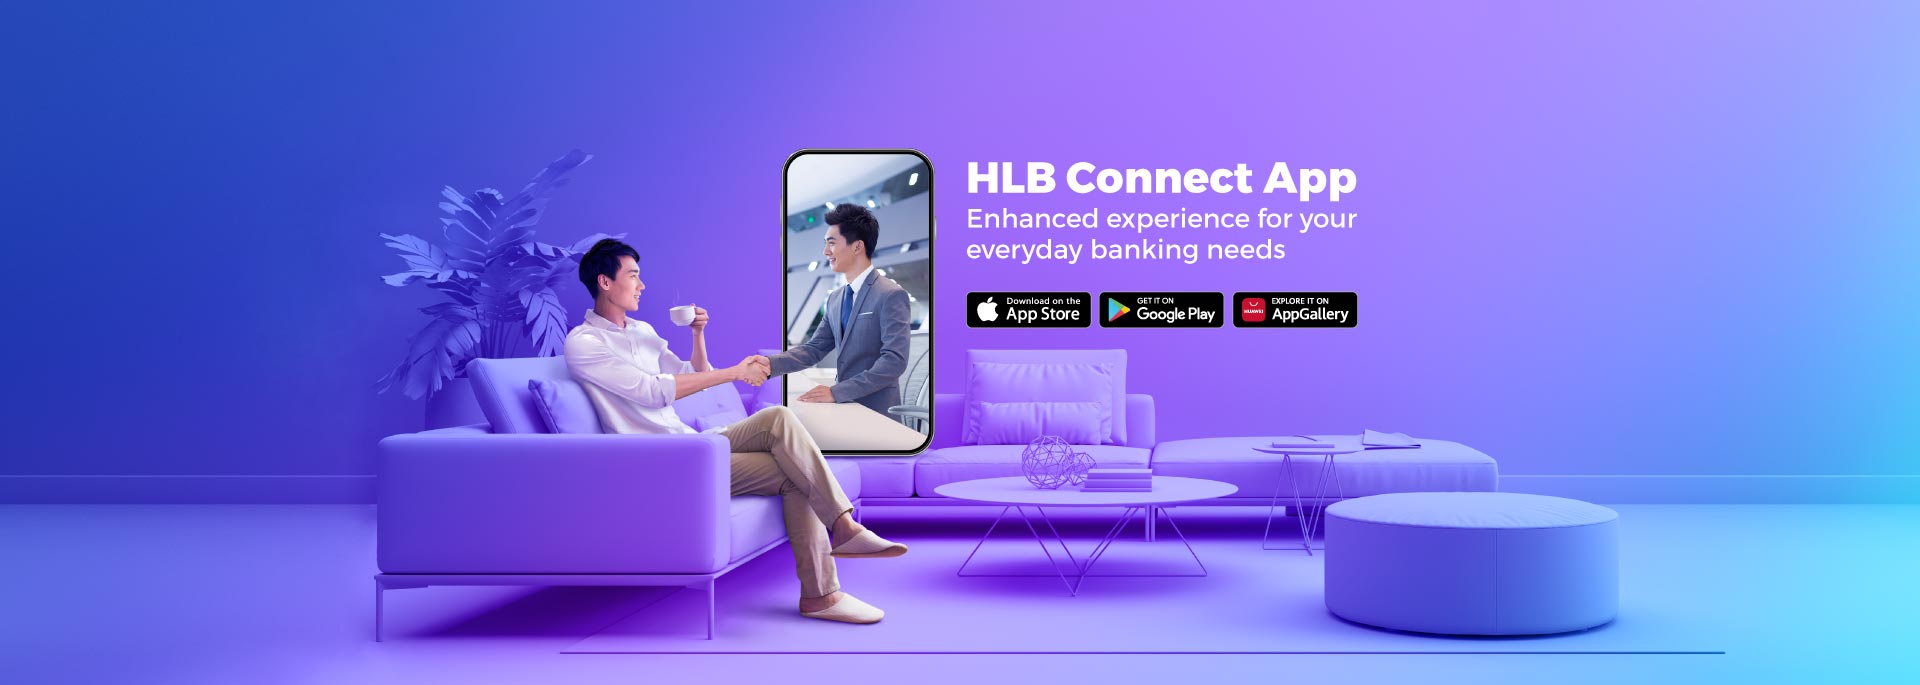 All new HLB Connect Mobile App